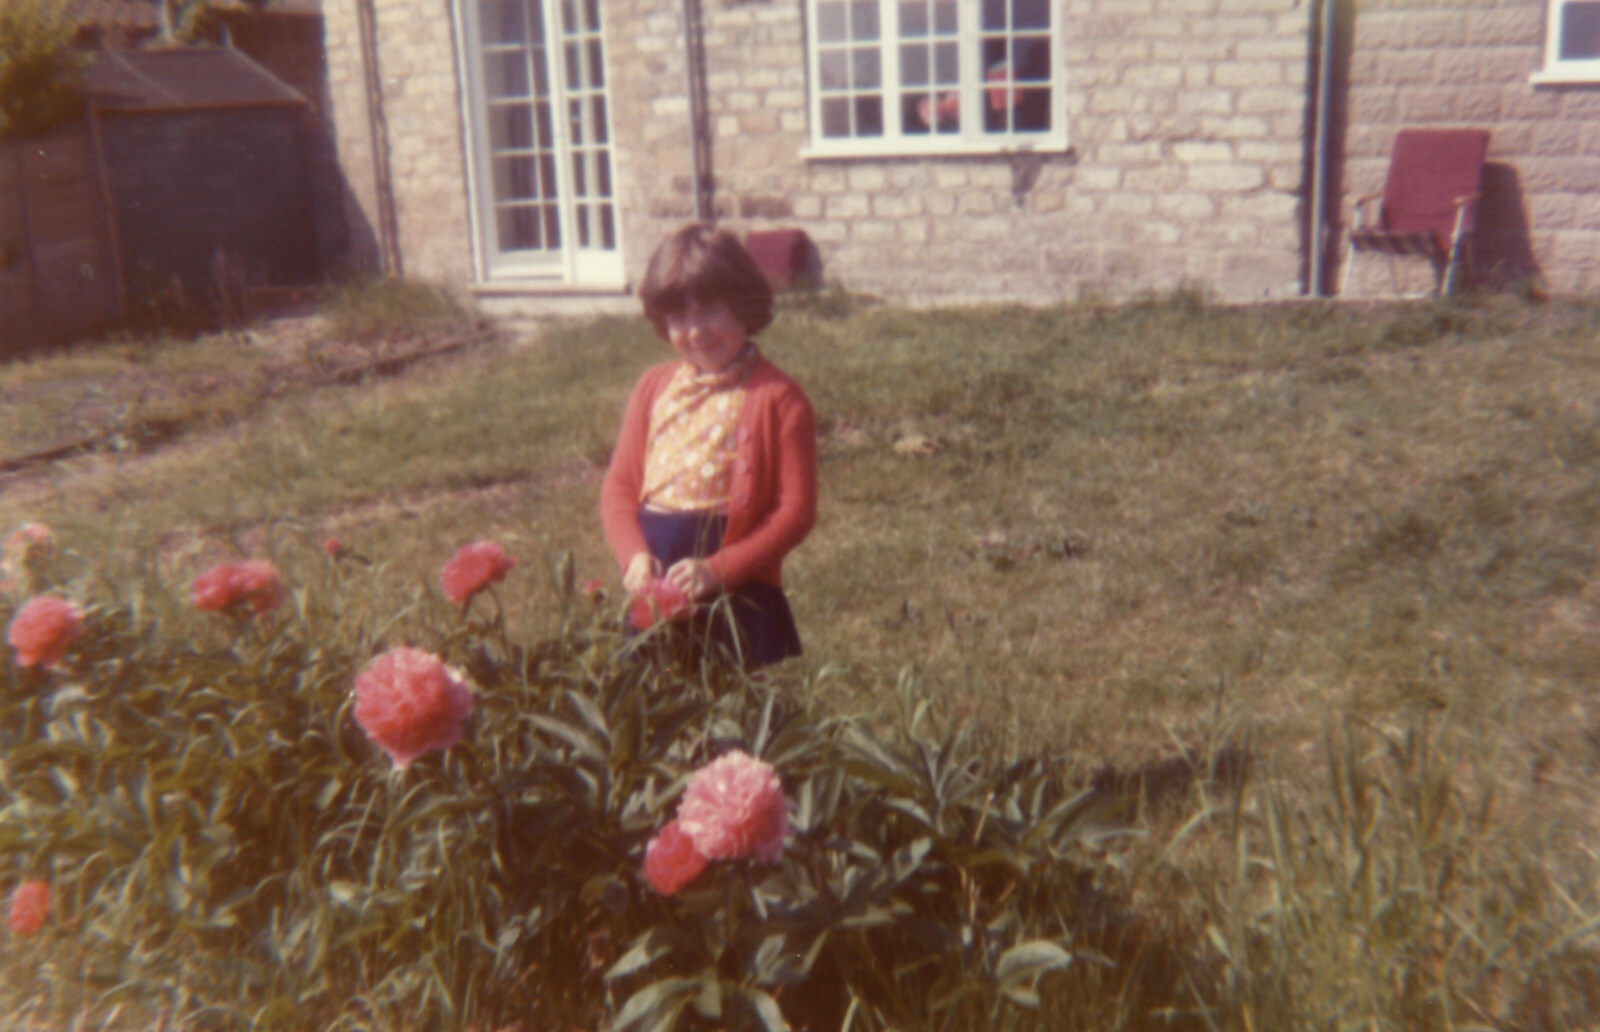 Sis in the garden at Malton from Family History: The 1970s, Timperley and Sandbach, Cheshire - 24th January 2020